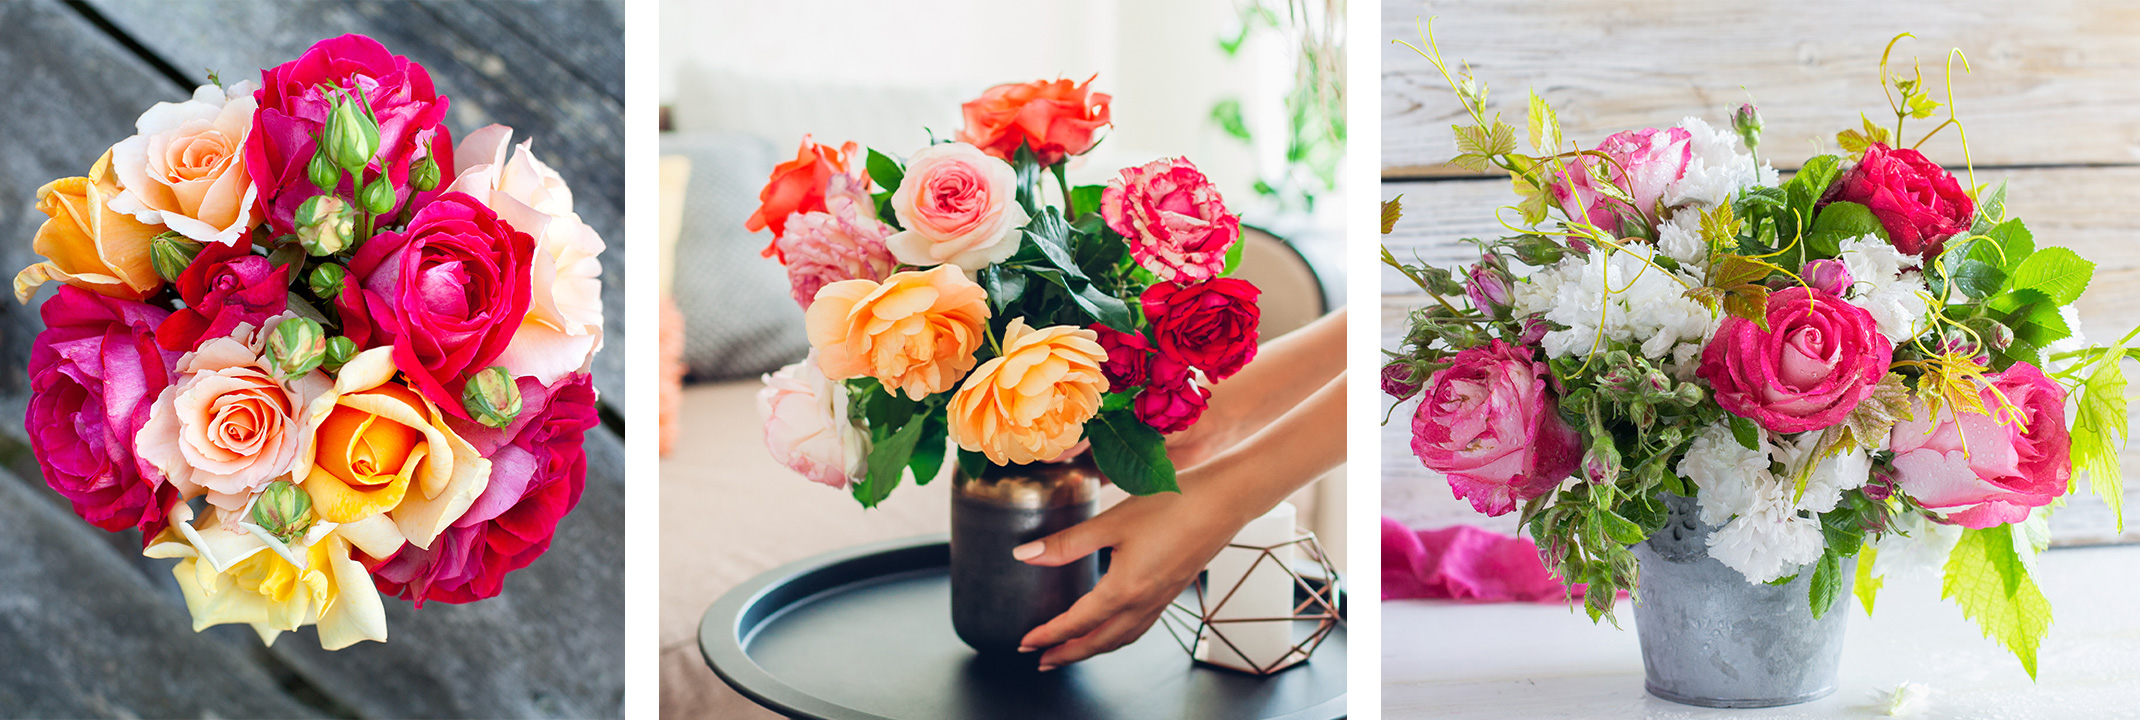 3 different flower arrangements with colorful, fresh-cut roses.